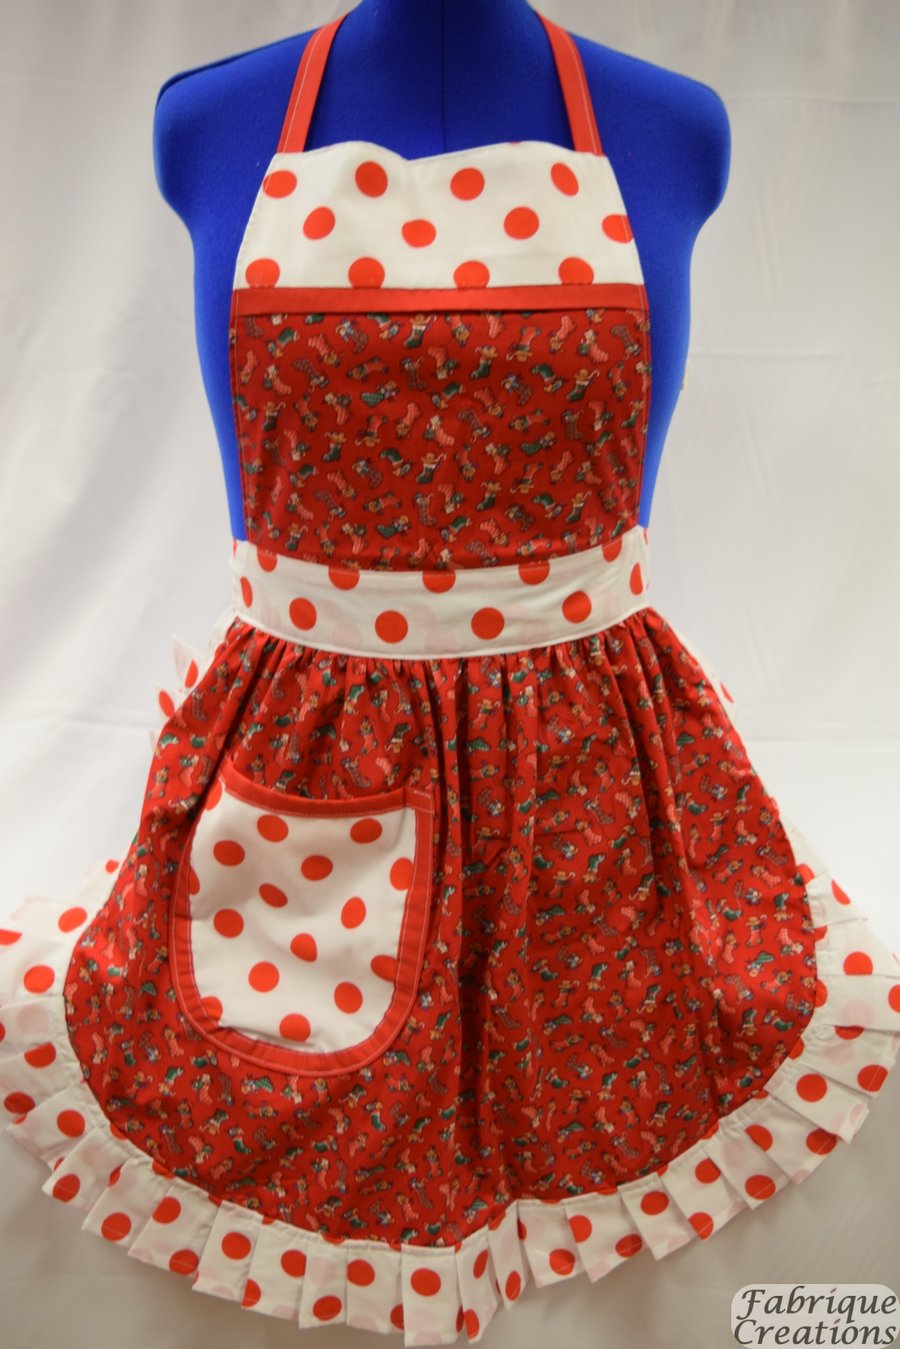 Vintage 50s Style Full Apron - Christmas Stockings on Red with Polka Dot Trim